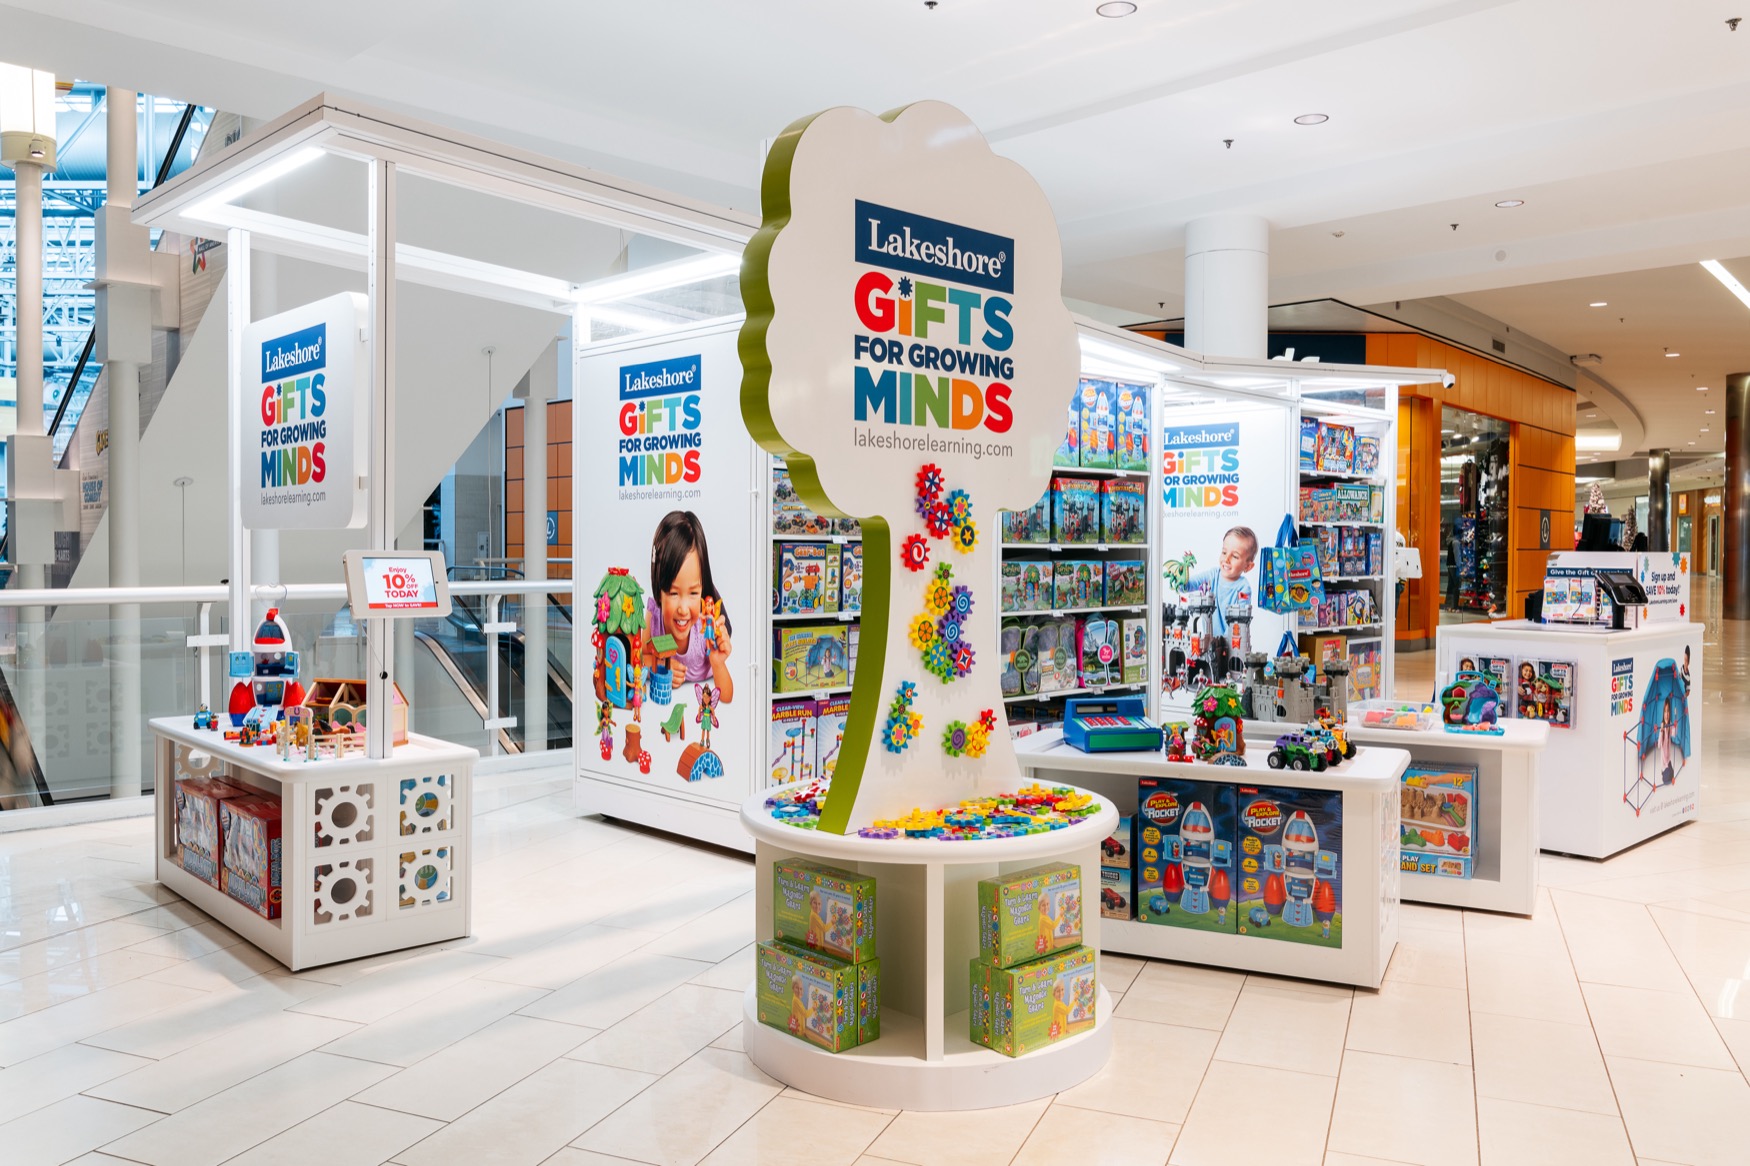 Lakeshore Gifts for Growing Kids in-mall toy display